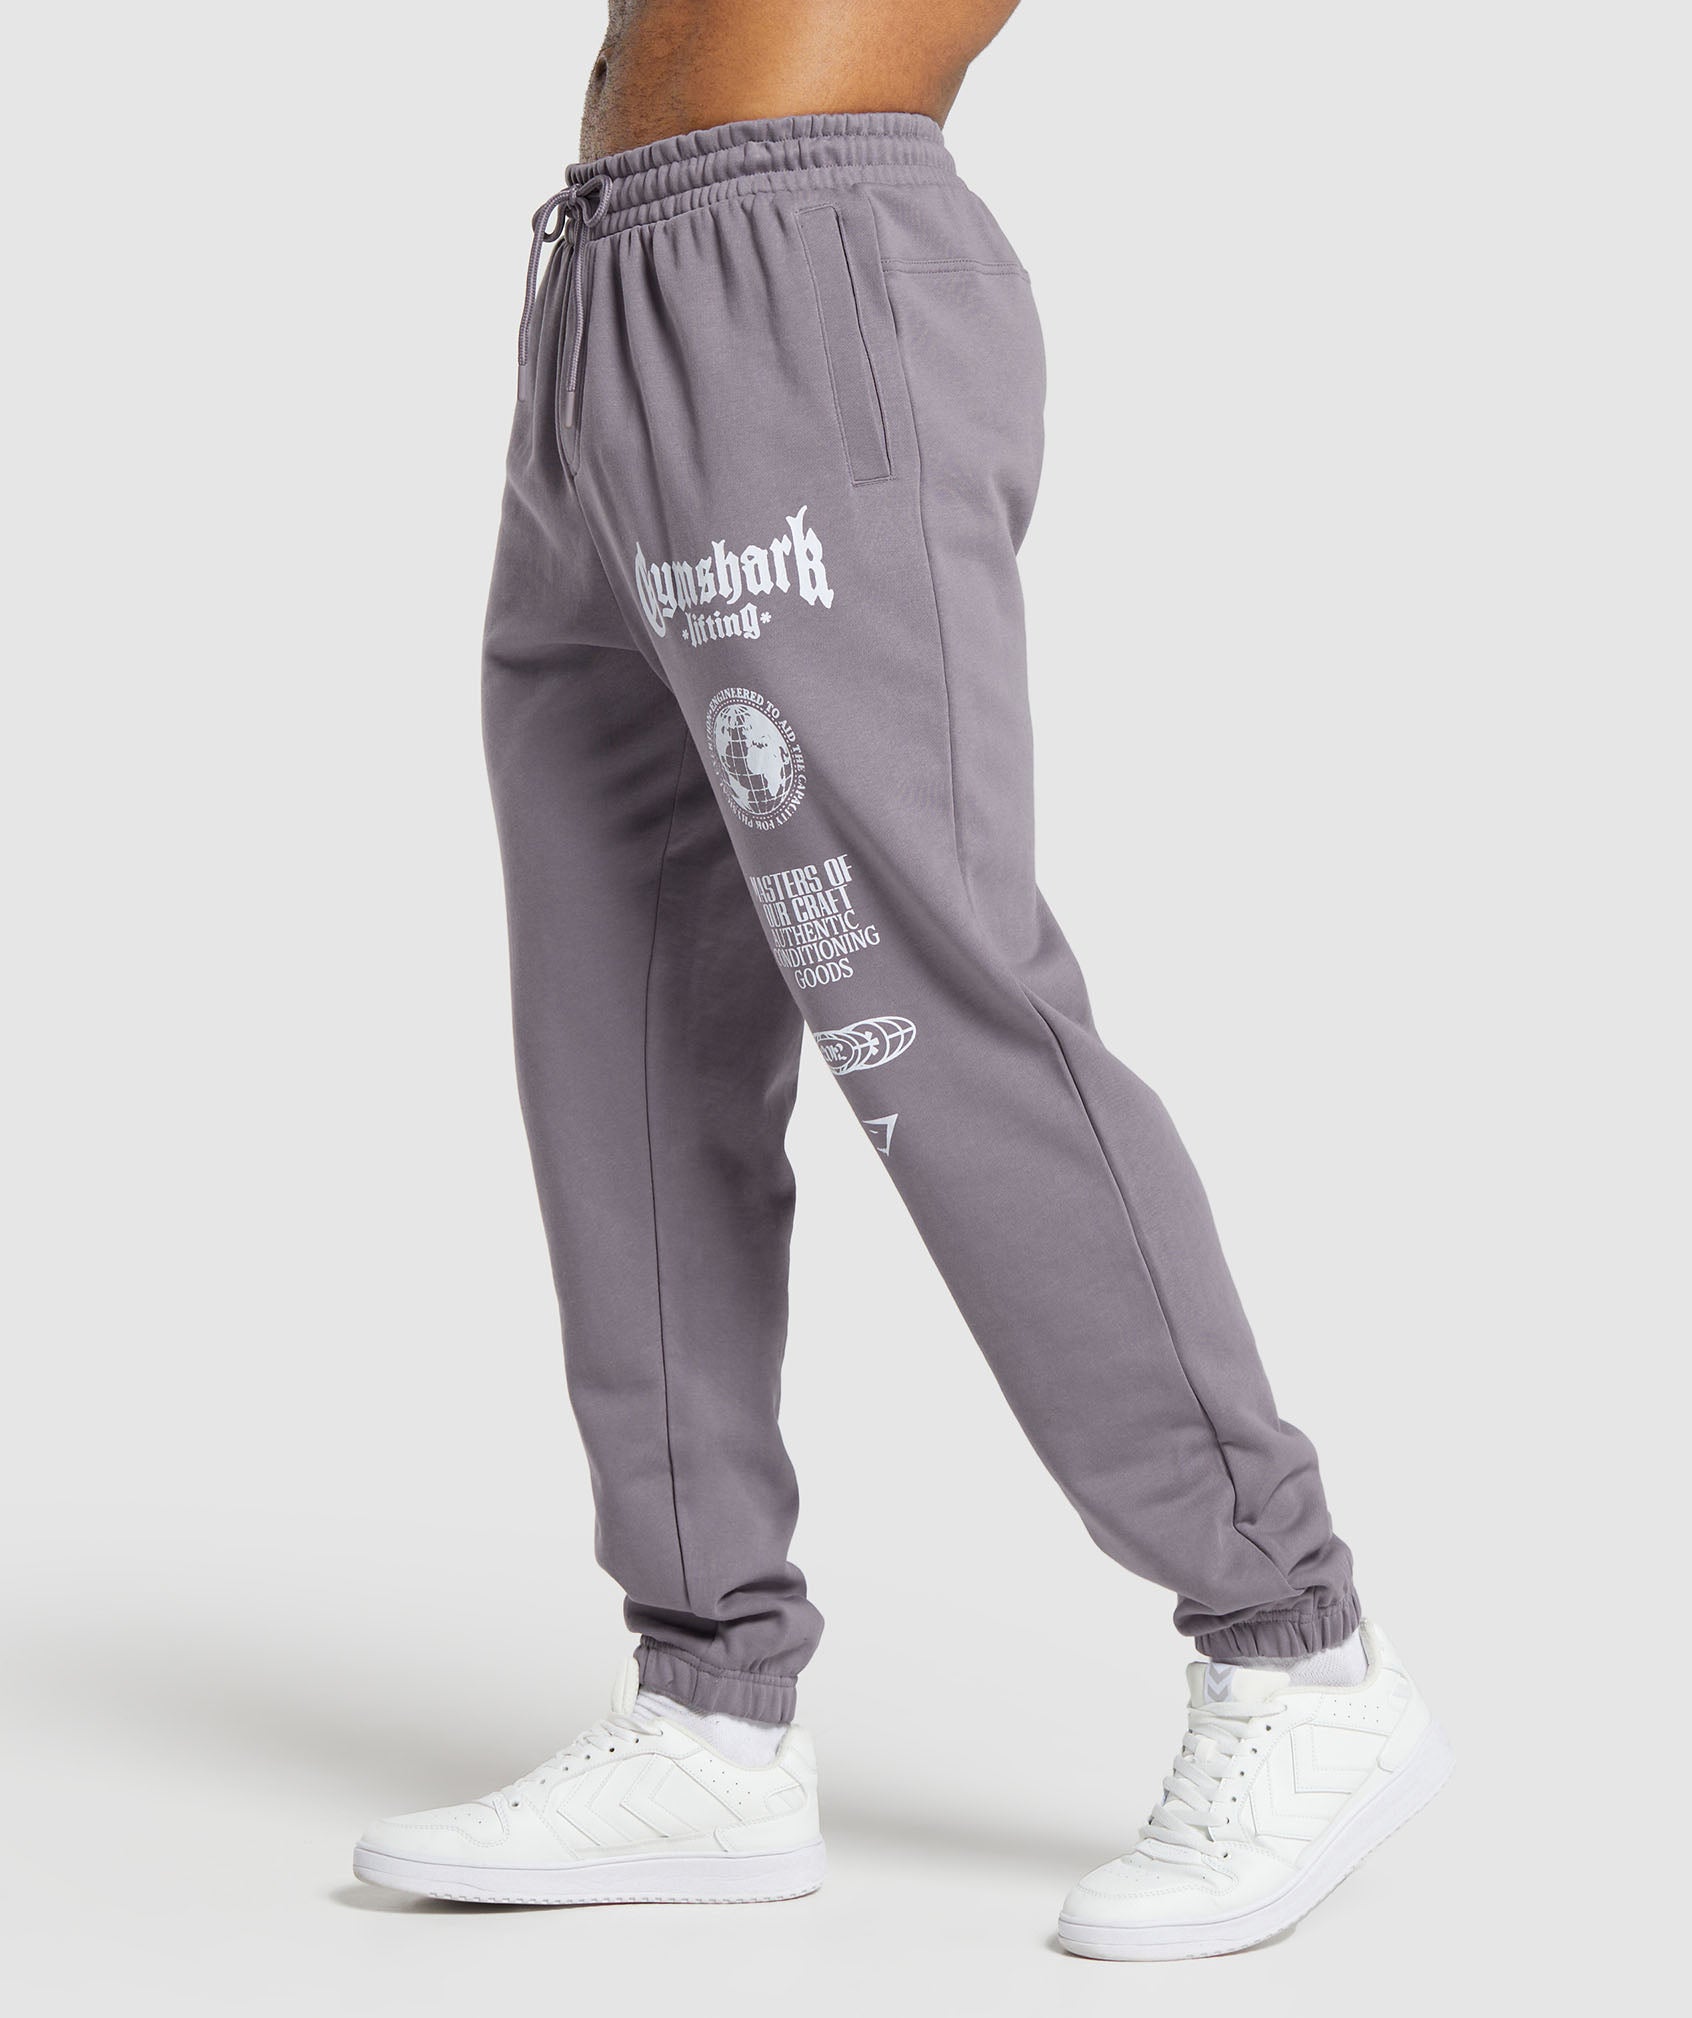 Global Lifting Oversized Essential Joggers in Fog Purple - view 3